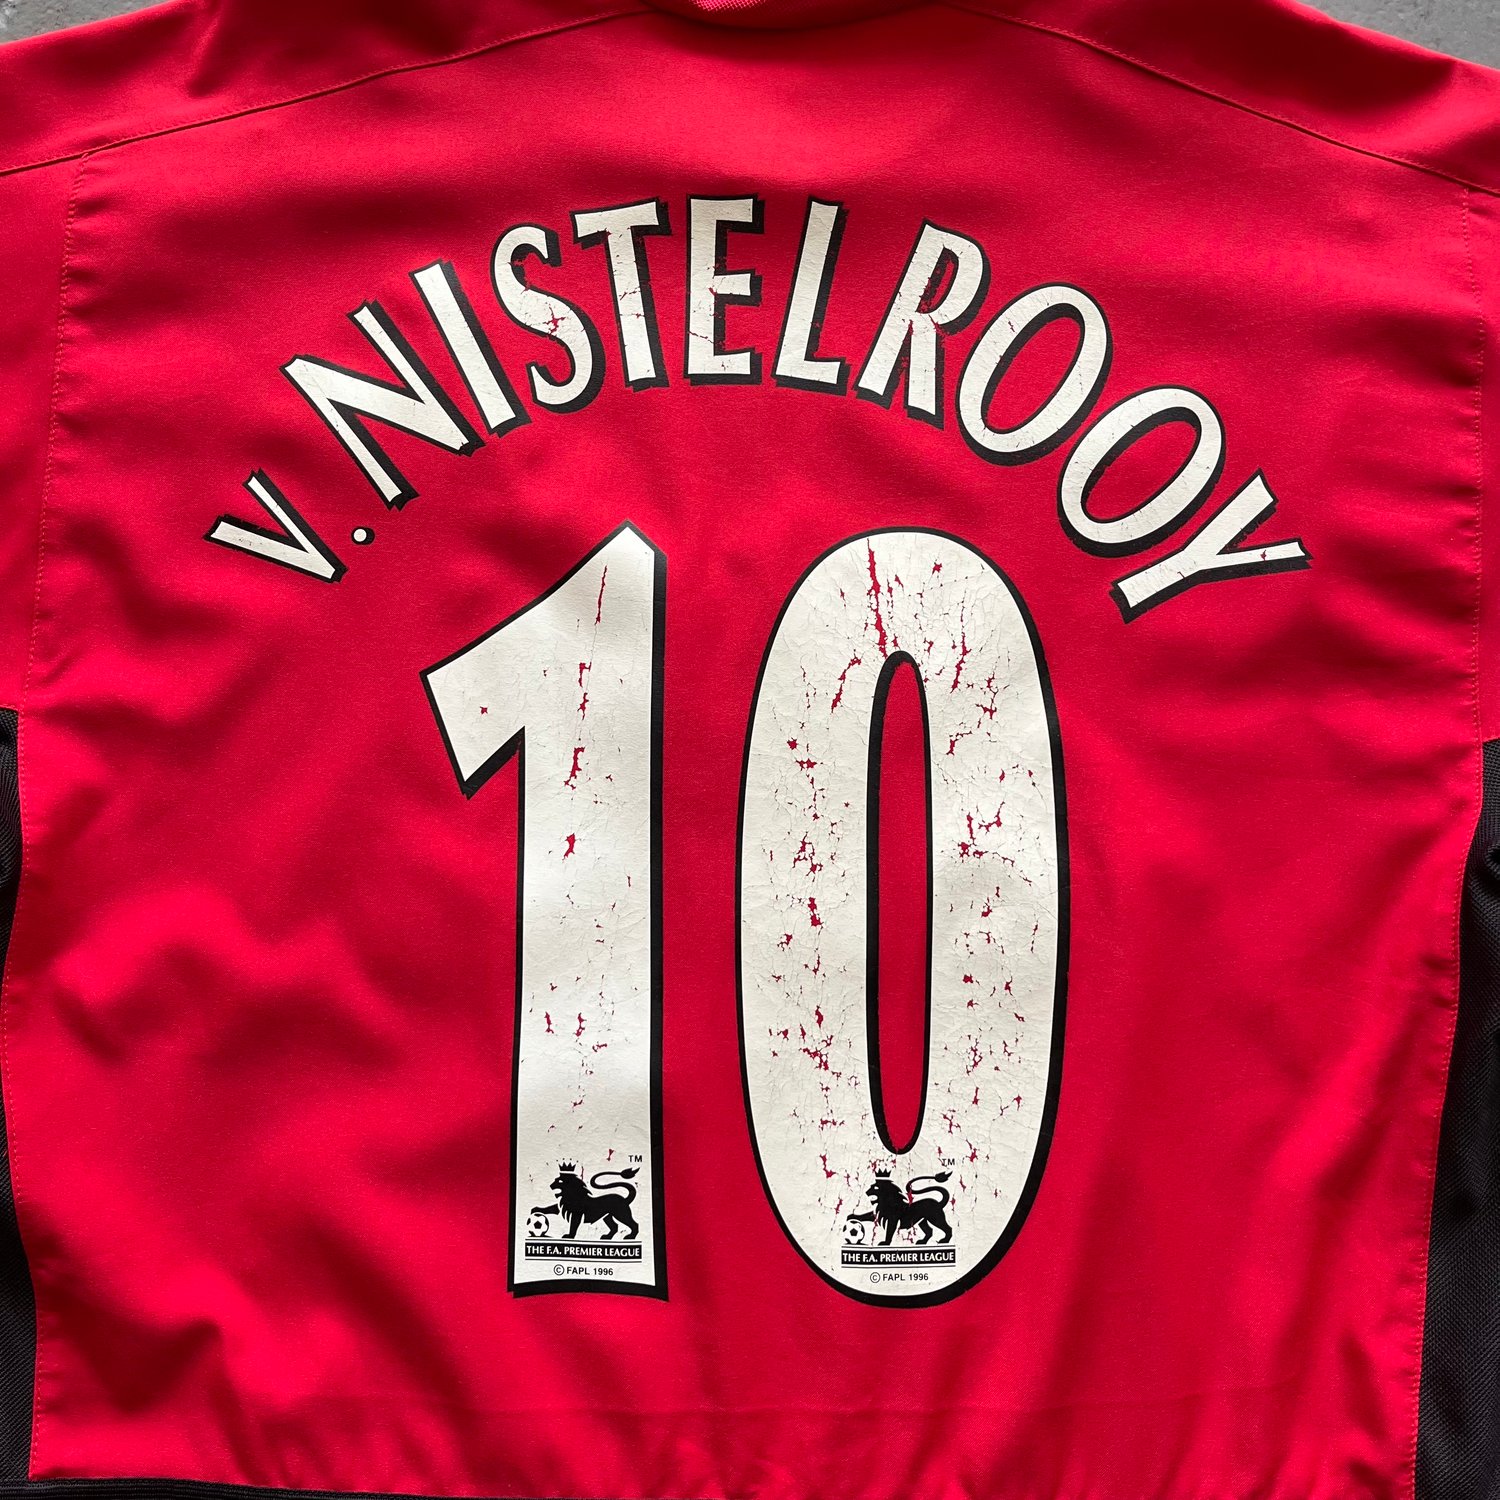 Image of 02/03 Manchester United home shirt size medium van nistelrooy 10